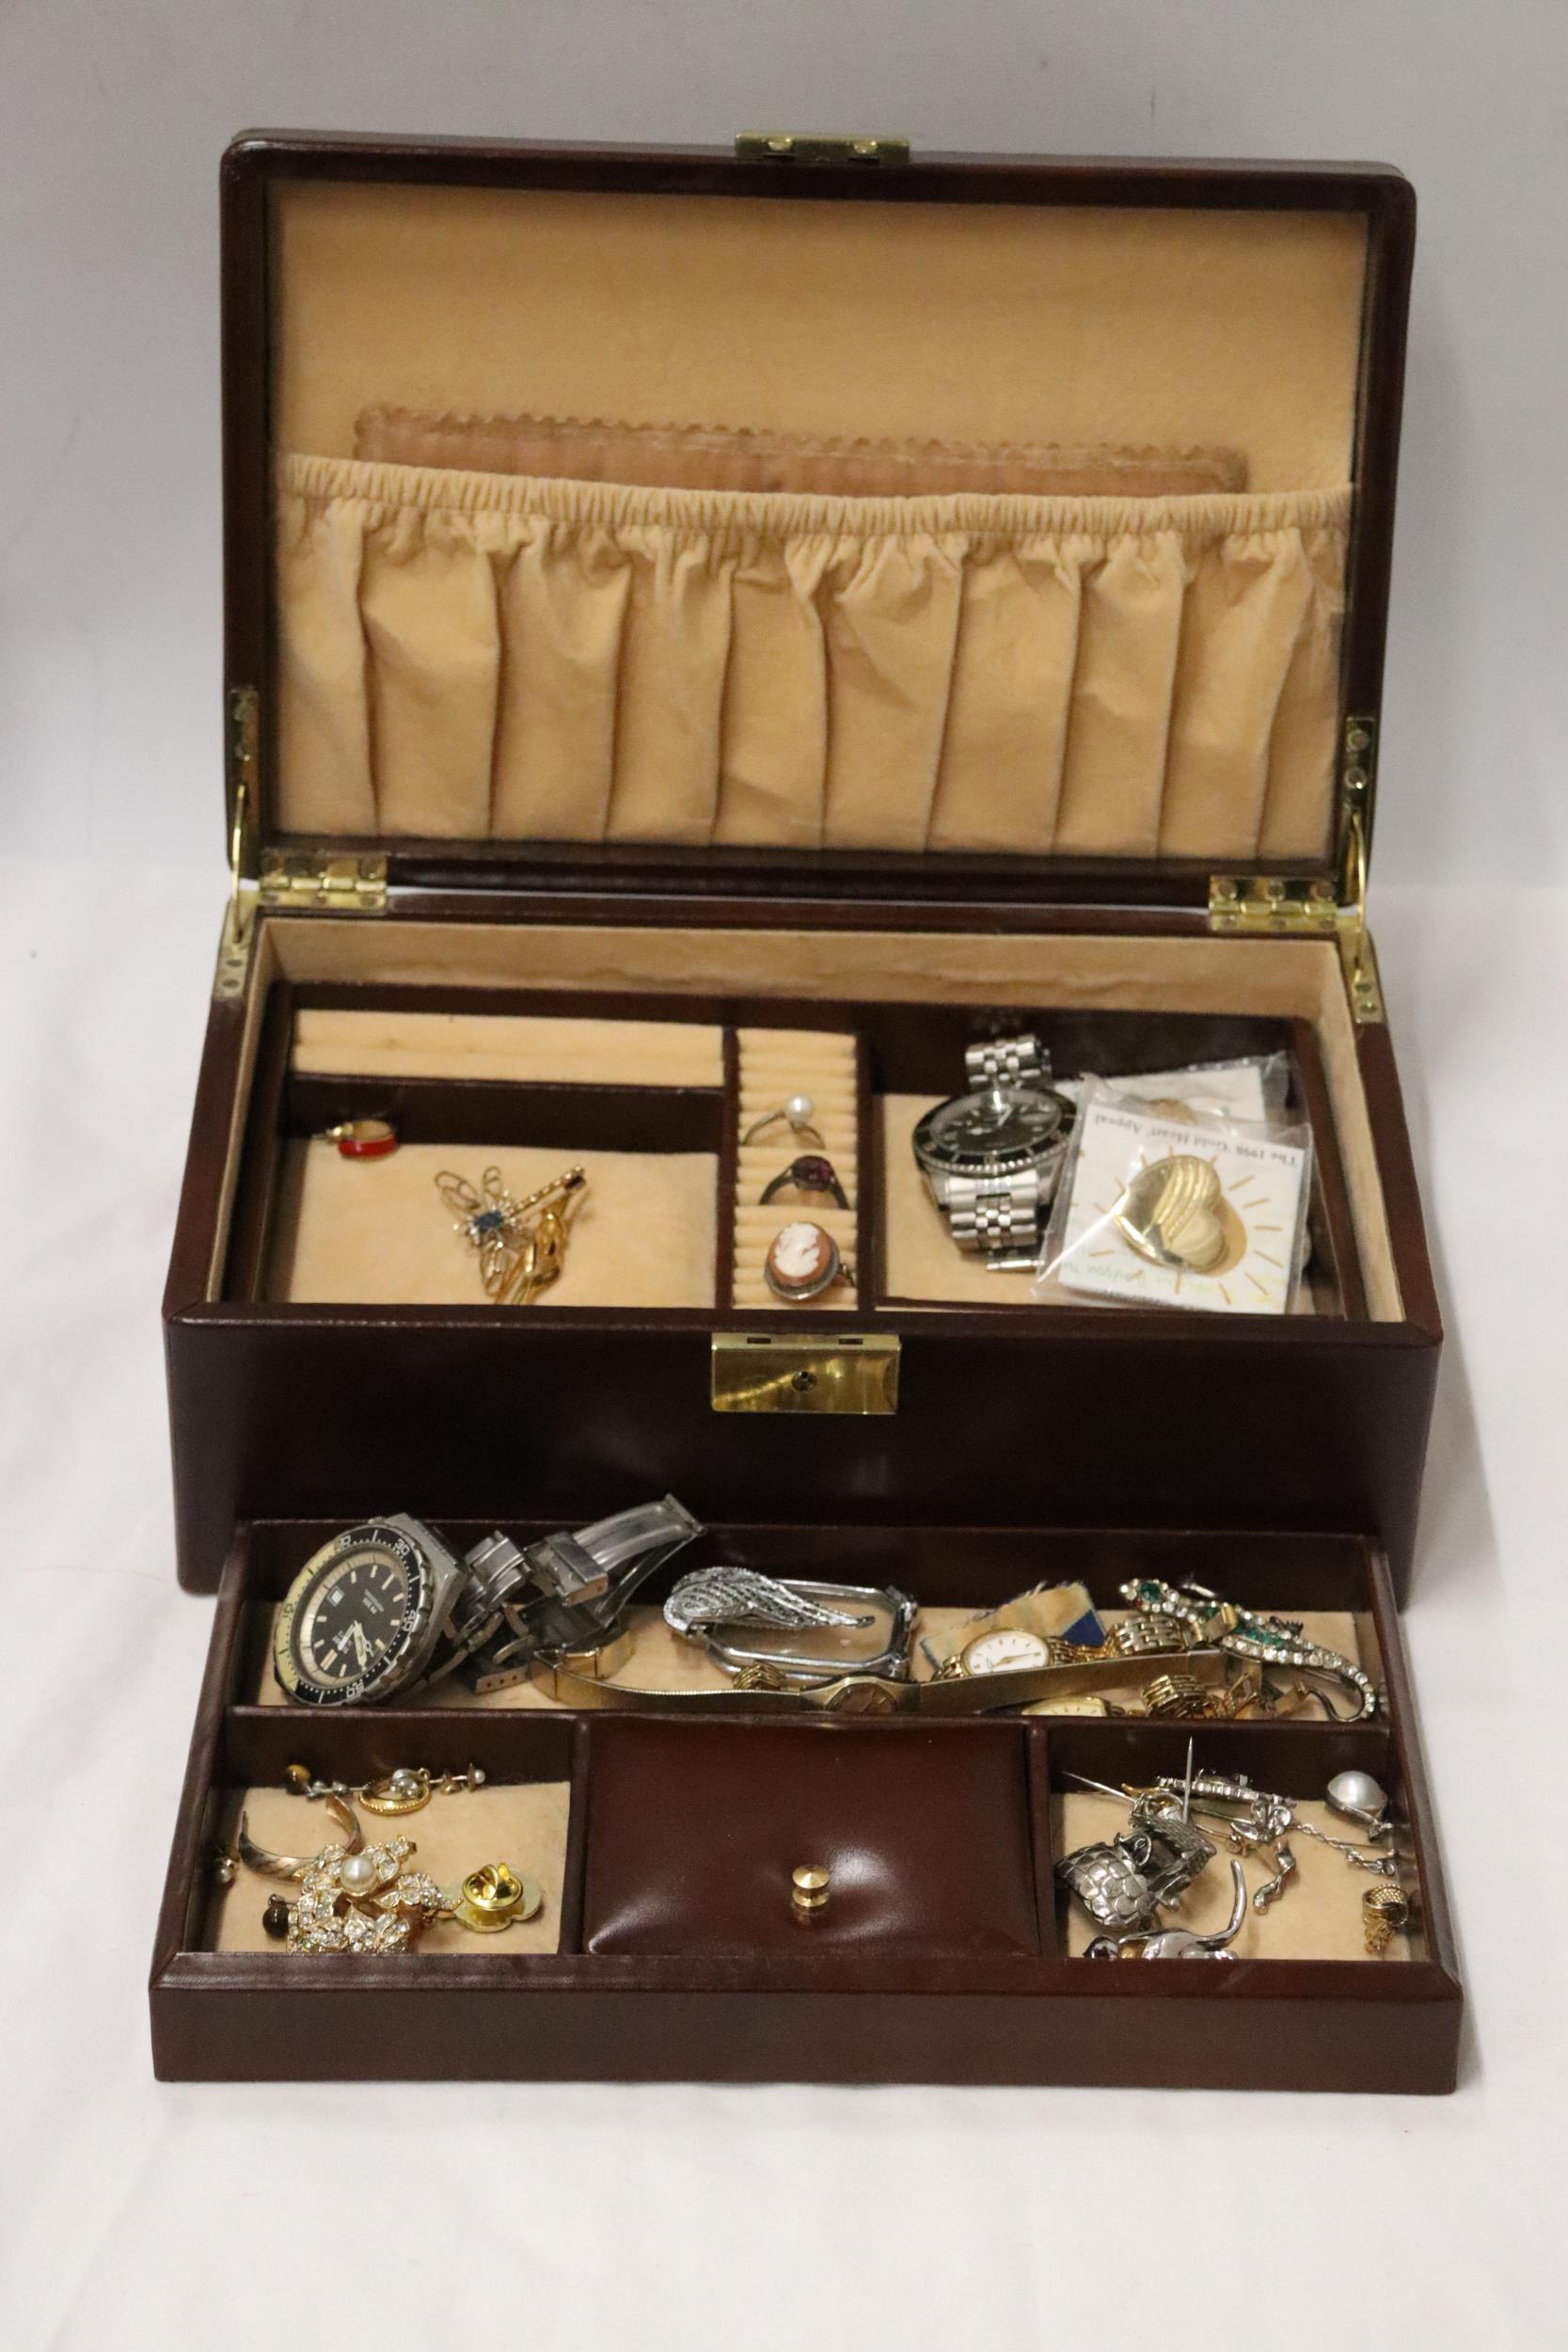 A QUANTITY OF COSTUME JEWELLERY TO INCLUDE WATCHES, BROOCHES, RINGS, A BAG OF COINS, ETC PLUS A